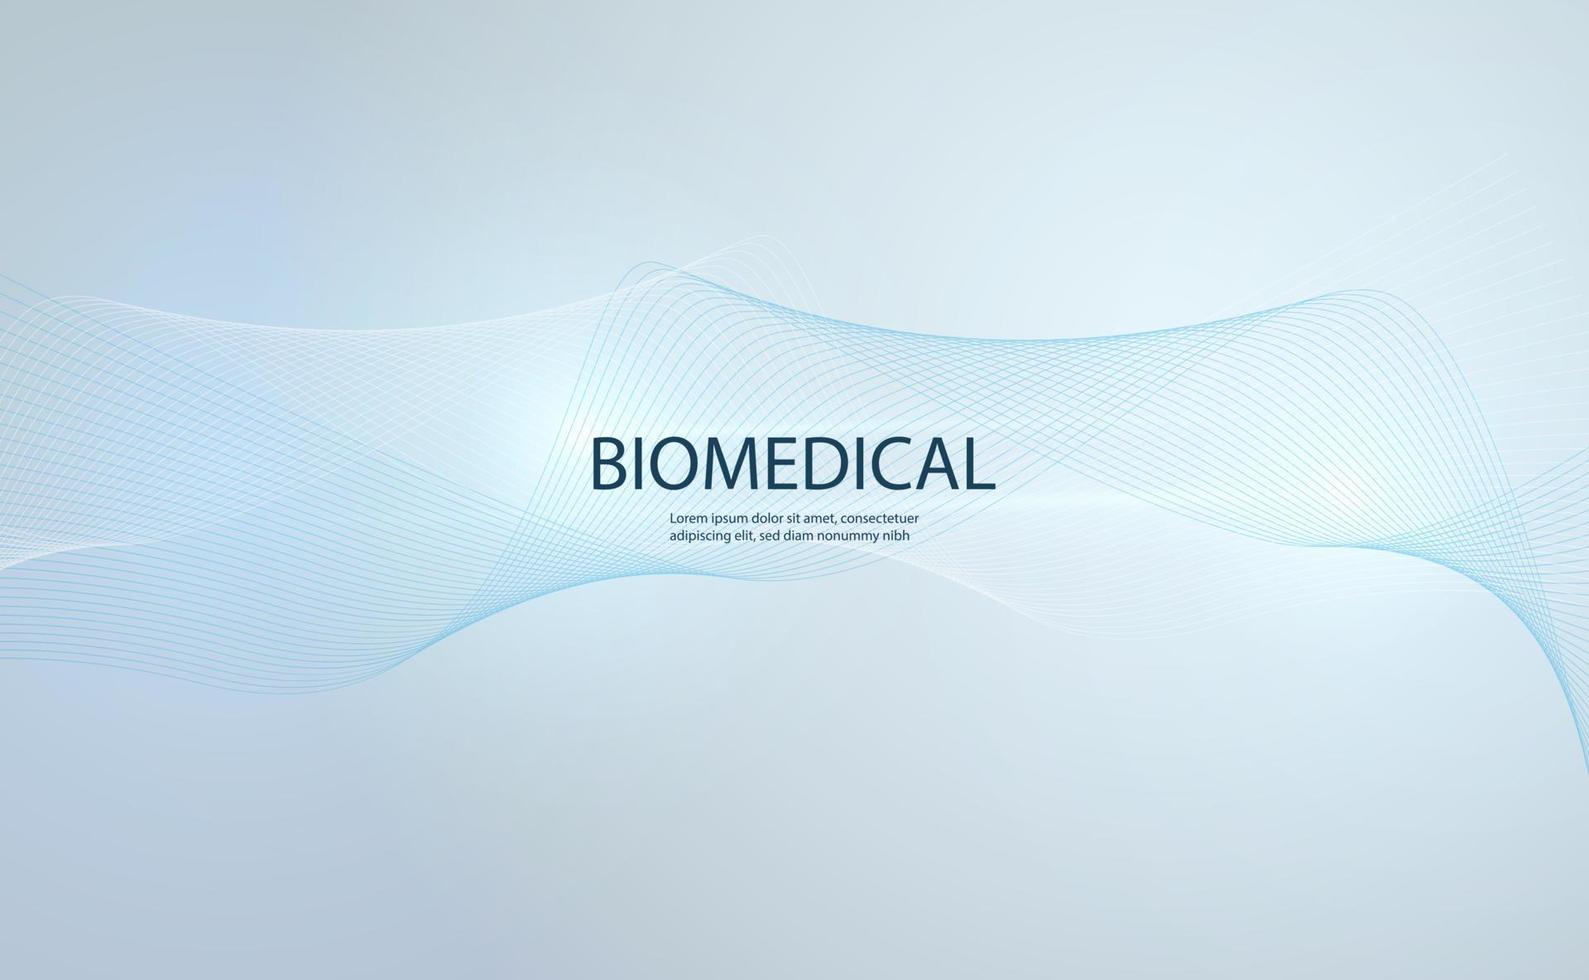 Abstract health science consist Wave particle digital technology concept  modern biomedical on hi tech future blue background. vector